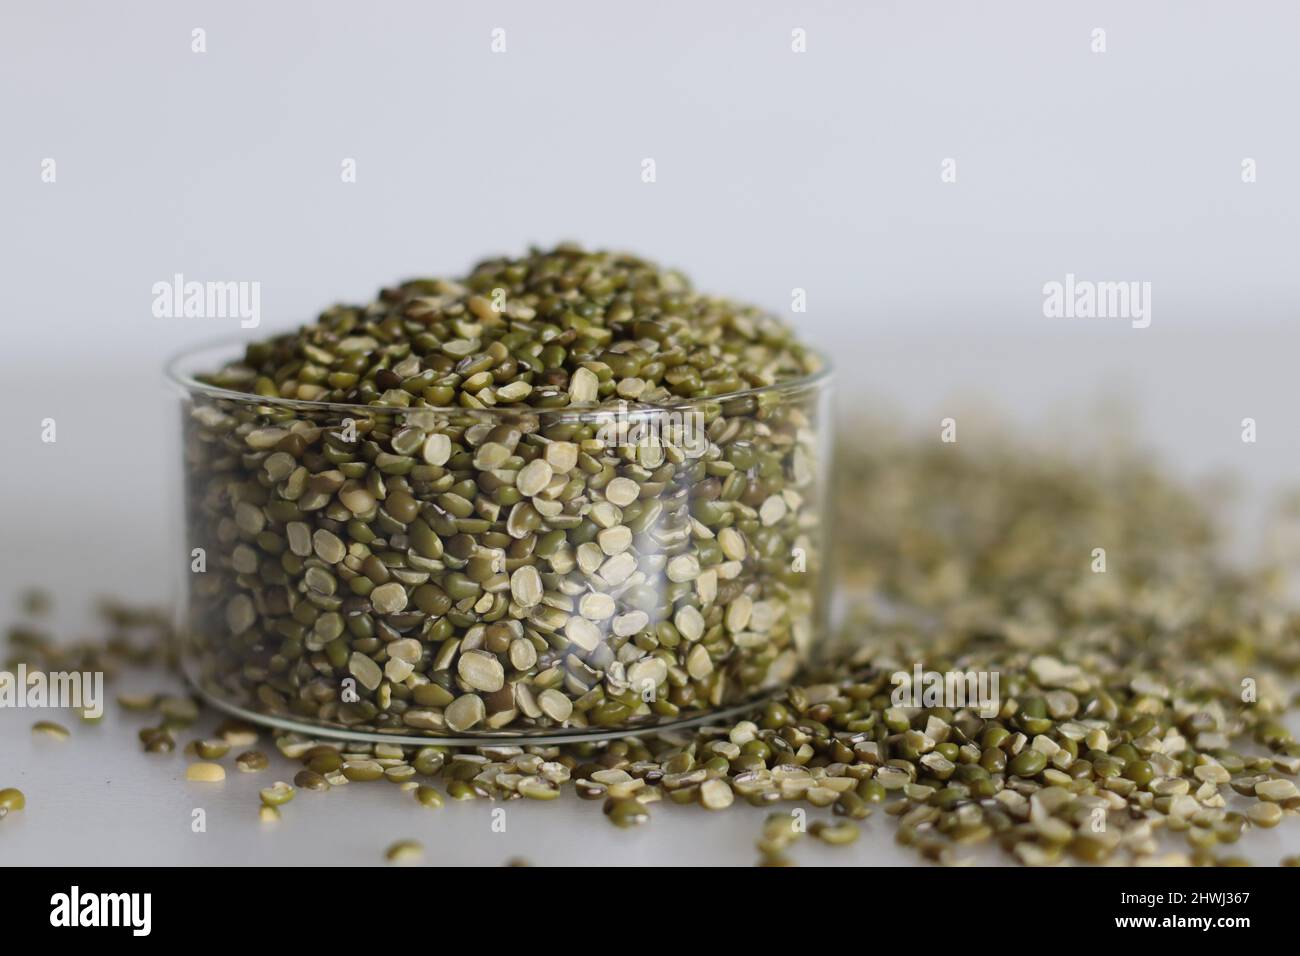 Split moong bean lentils in a small glass bowl. Shot on white background with pile of split moong beans are scattered around. Stock Photo